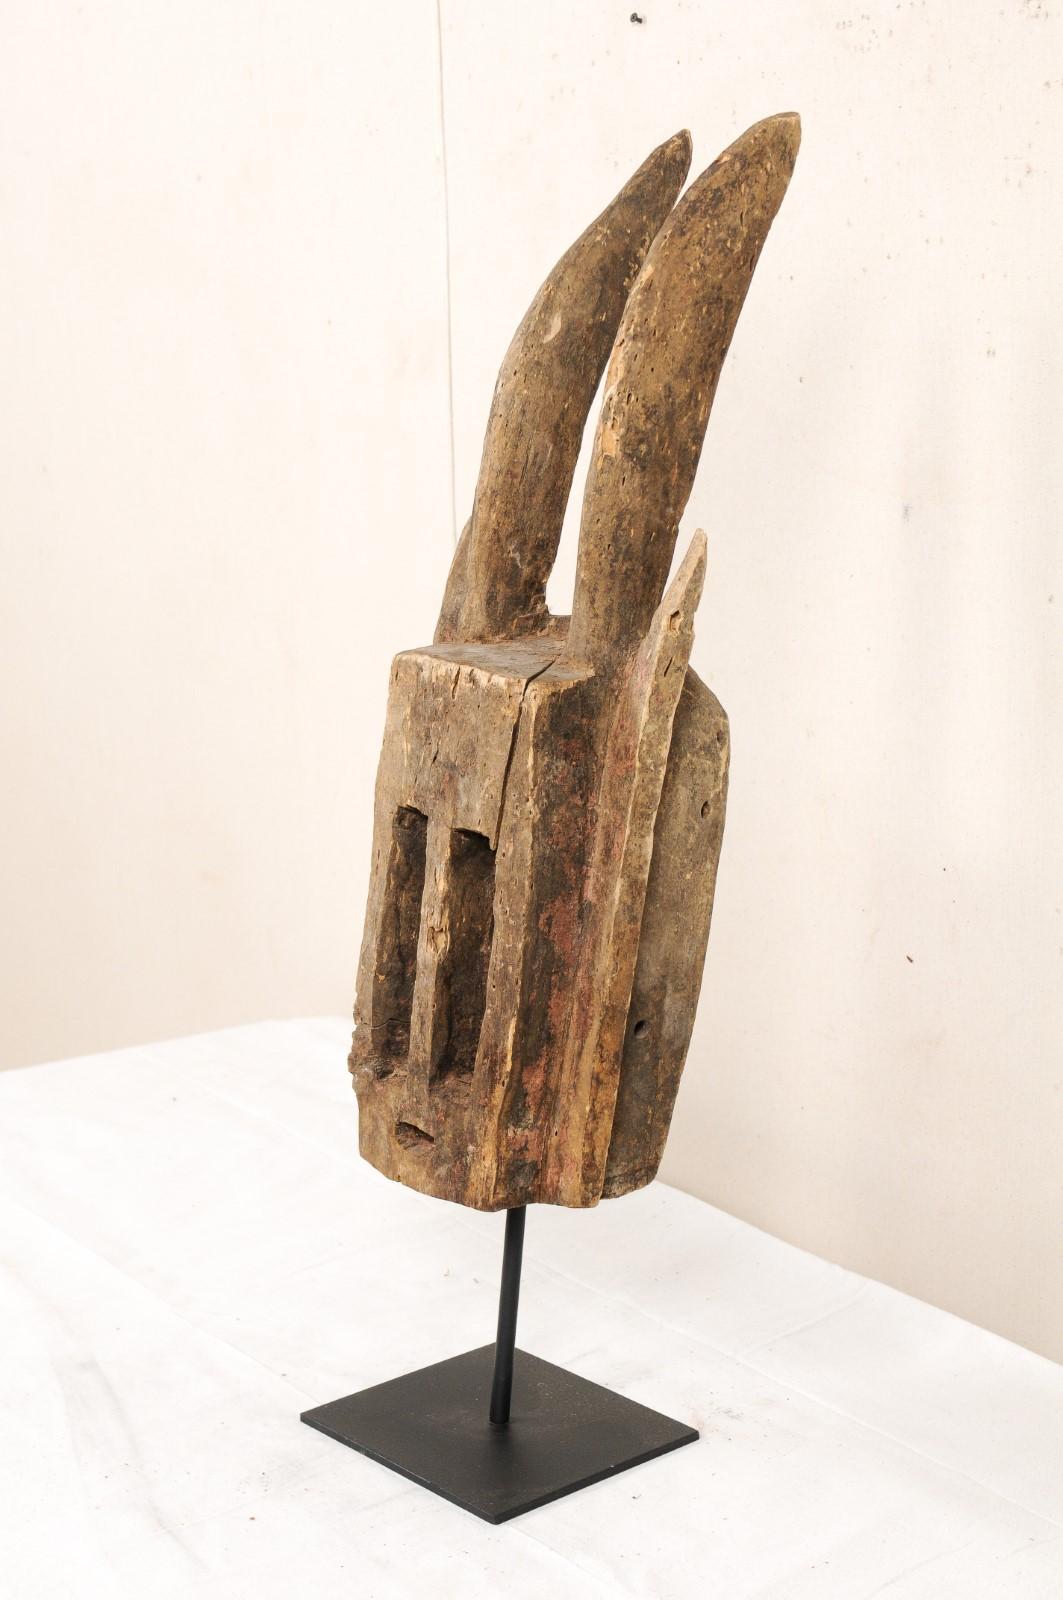 Hand-Carved A West African Dogon Tribe Antelope Ceremonial Dance Mask on Custom Iron Stand